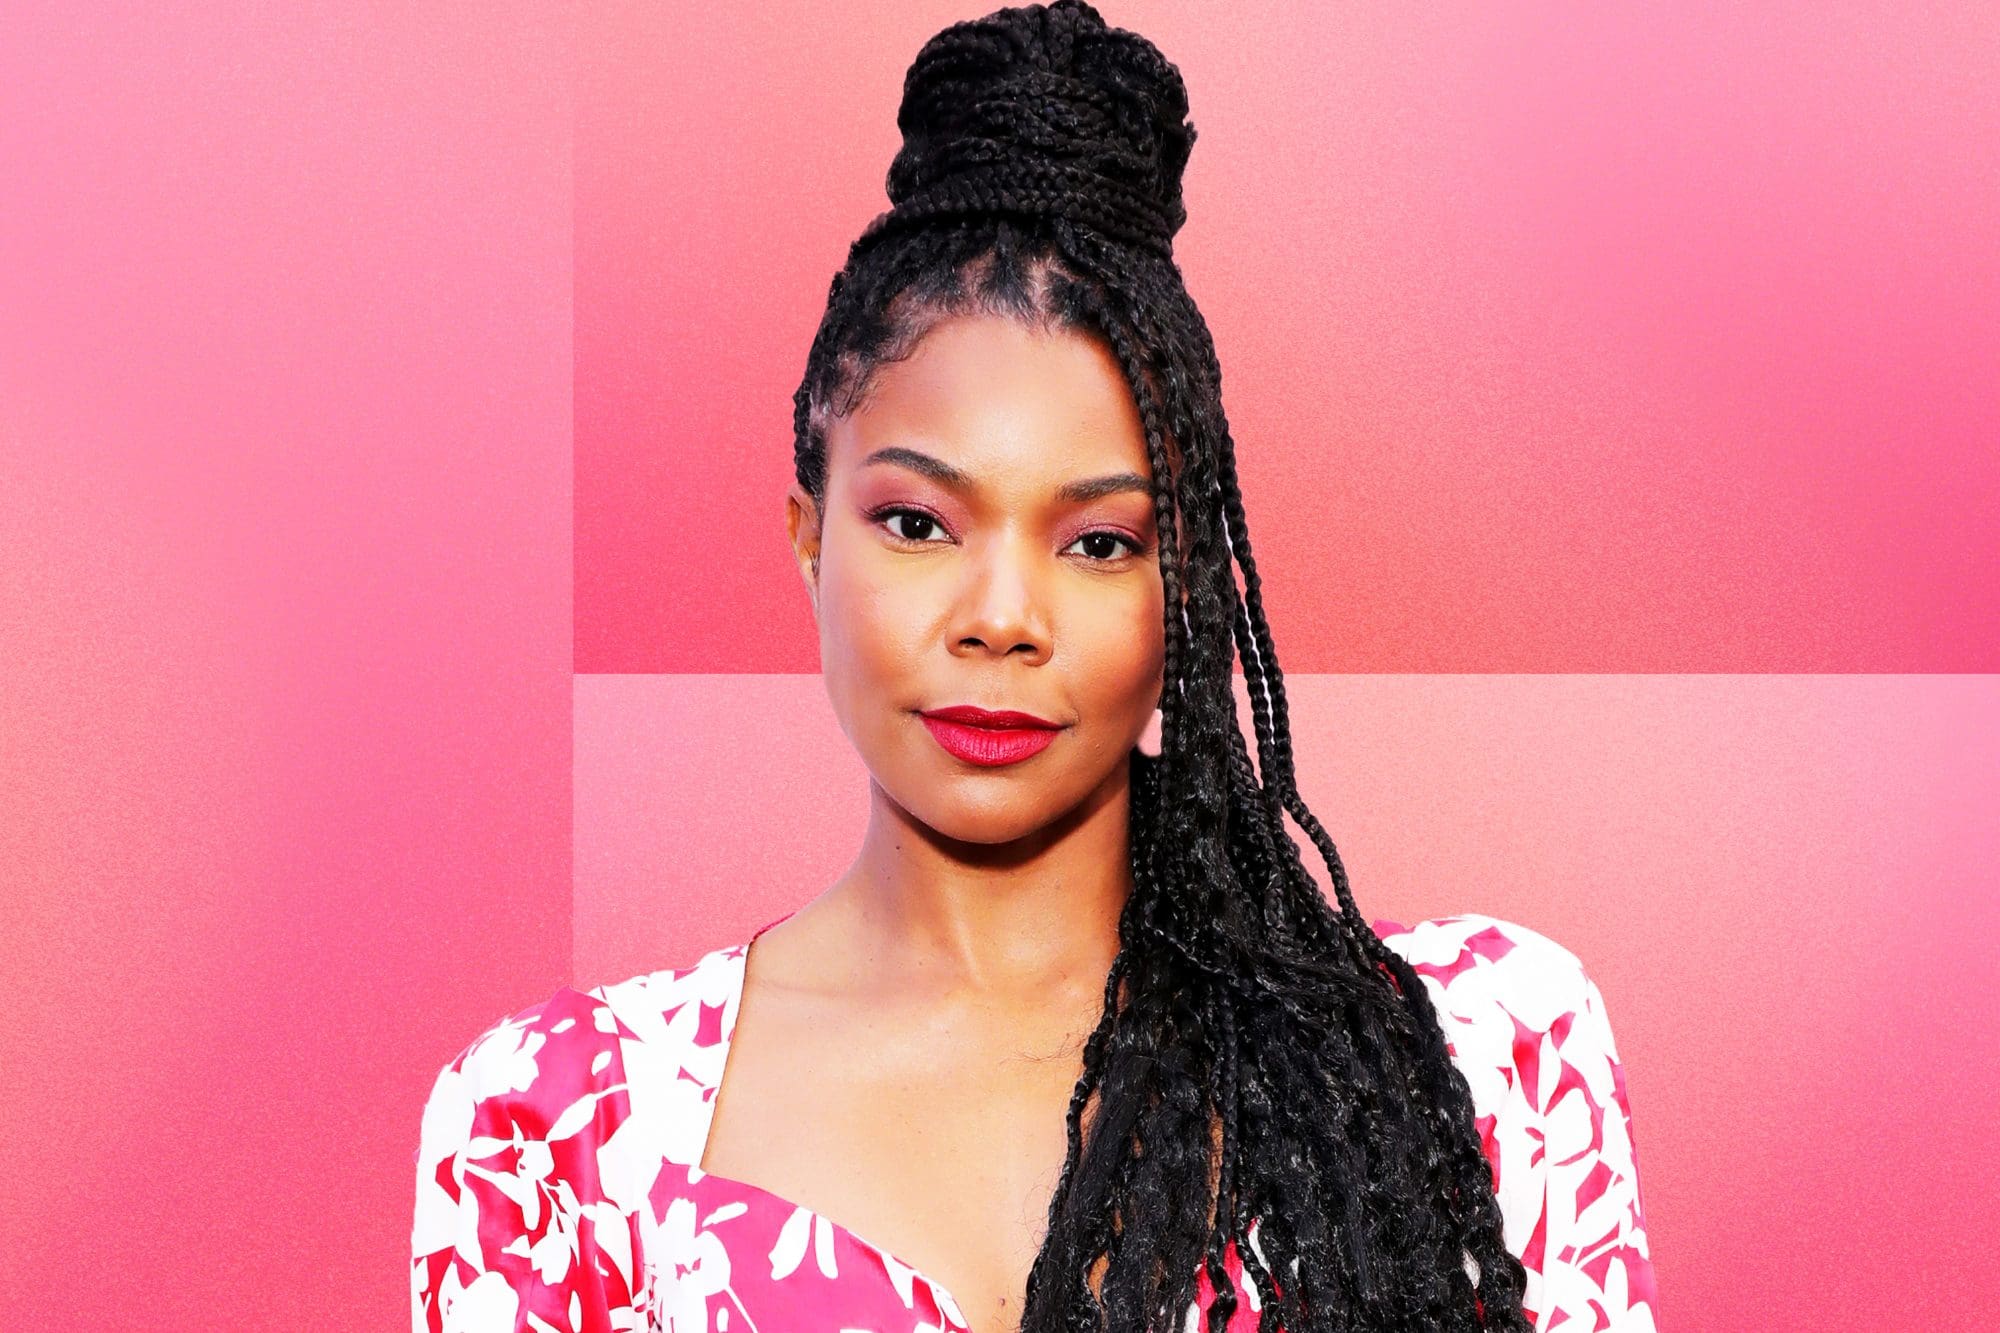 ”gabrielle-union-shares-an-important-message-about-film-industry”